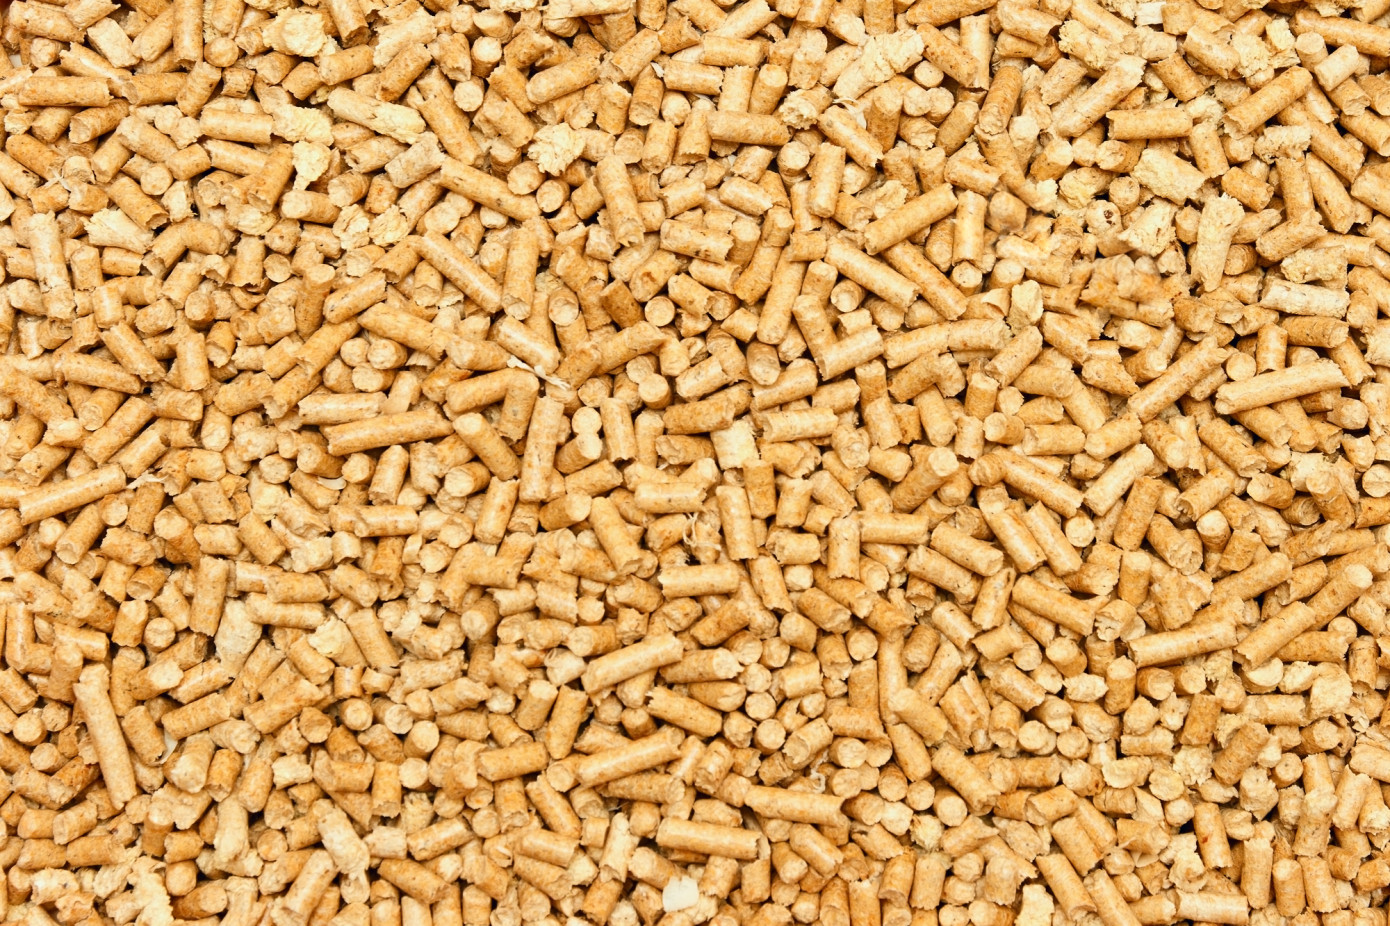 In March, price for wood pellets exported from Vietnam to South Korea gains 3%